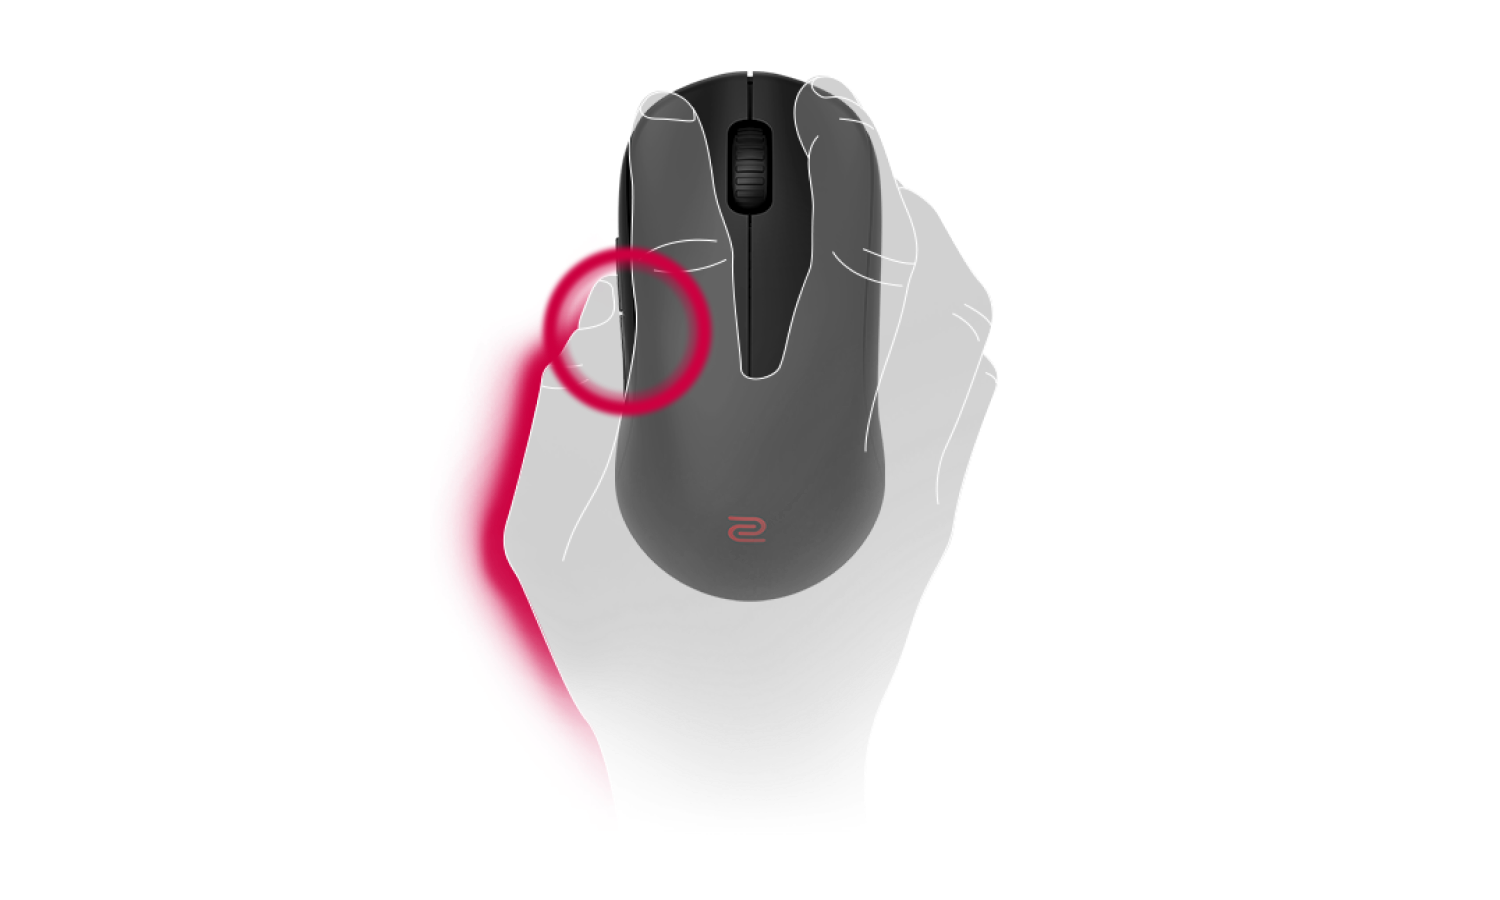 ZOWIE U2 ワイヤレスゲーミングマウス for e-Sports | ZOWIE Japan